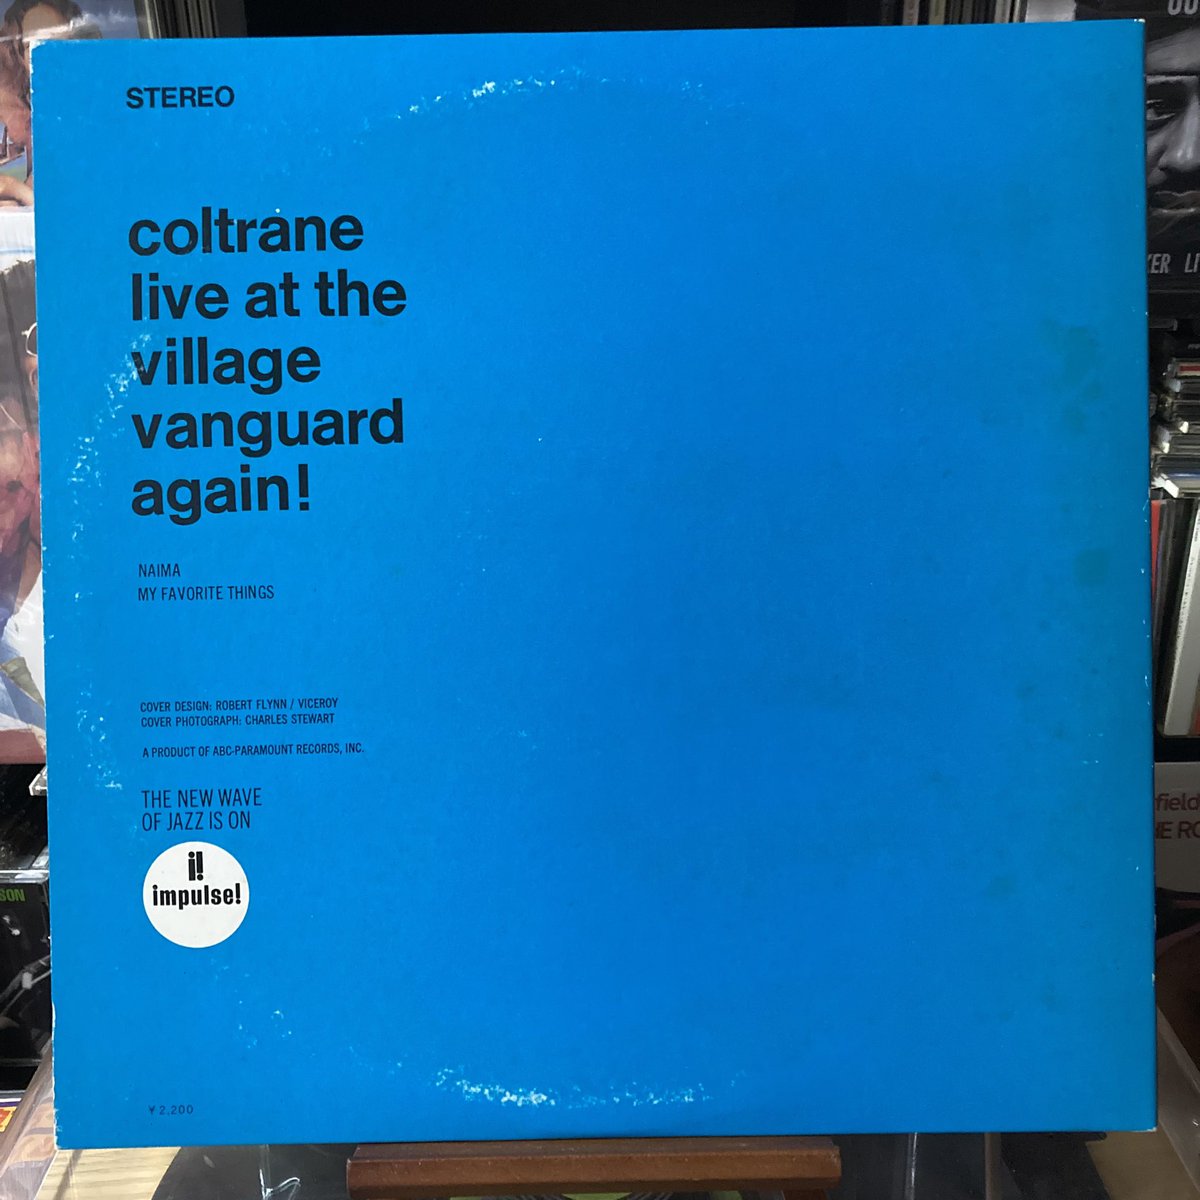 John Coltrane/Live At The Village Vanguard Again!
#nowplaying 
#vinyl #records #recordcollection
#cds #cdcollection
#johncoltrane #pharoahsanders